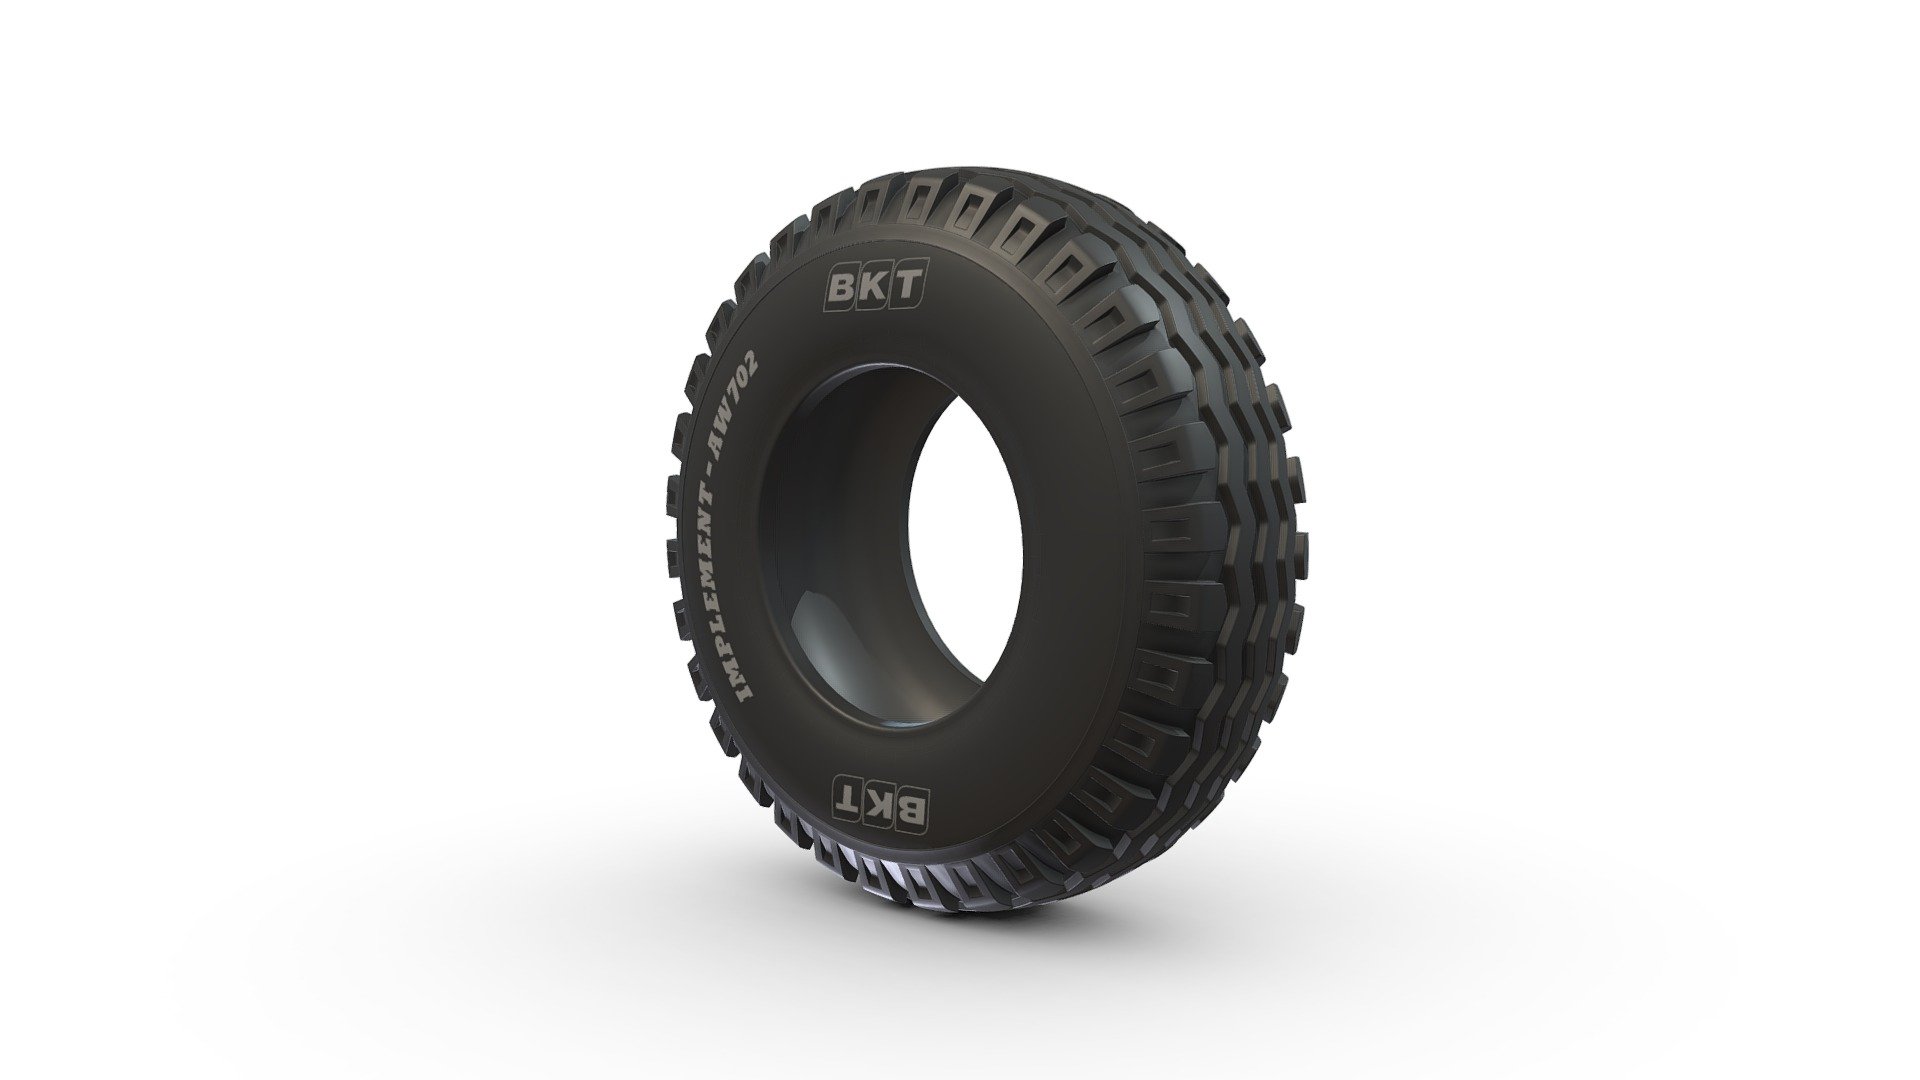 AW 702 has been developed for implement machinery, trailers and balers in soil tillage and haulage applications. This heavy-duty tire has been designed by BKT to provide a new level of durability. AW 702 is available in different versions to meet specific end-user needs: an “aramid belted” version is available for those who need strengthened puncture resistance, the “HD” version has a special cut-and-chip resistant compound, while the “special” version provides extraordinary stubble resistance 3d model